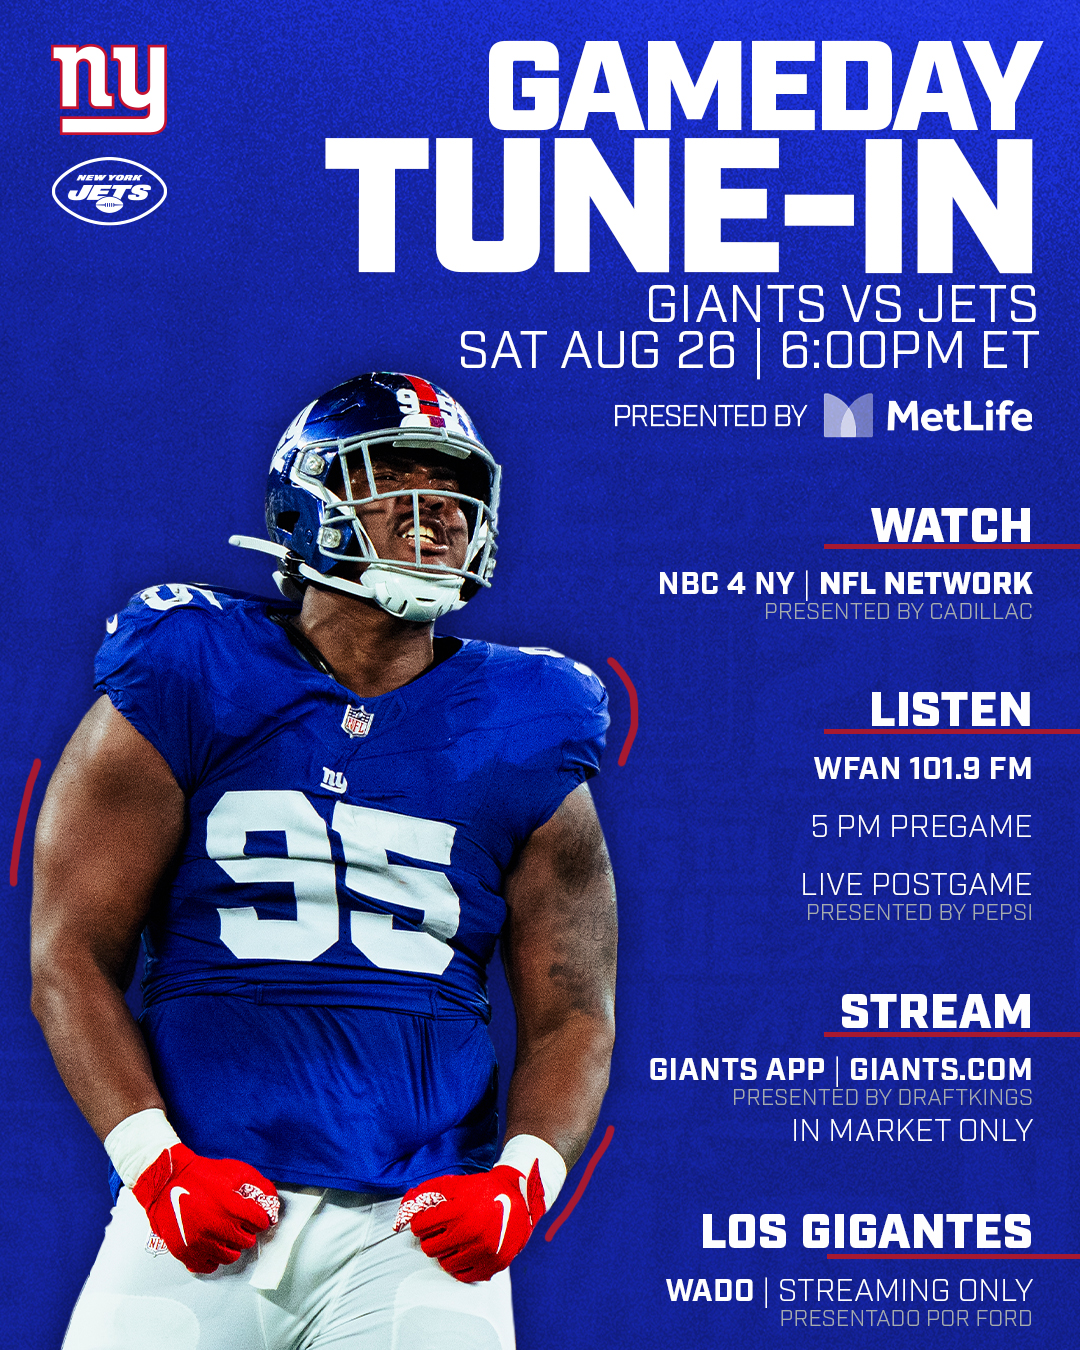 New York Giants vs. New York Jets: How to Watch, Listen & Live